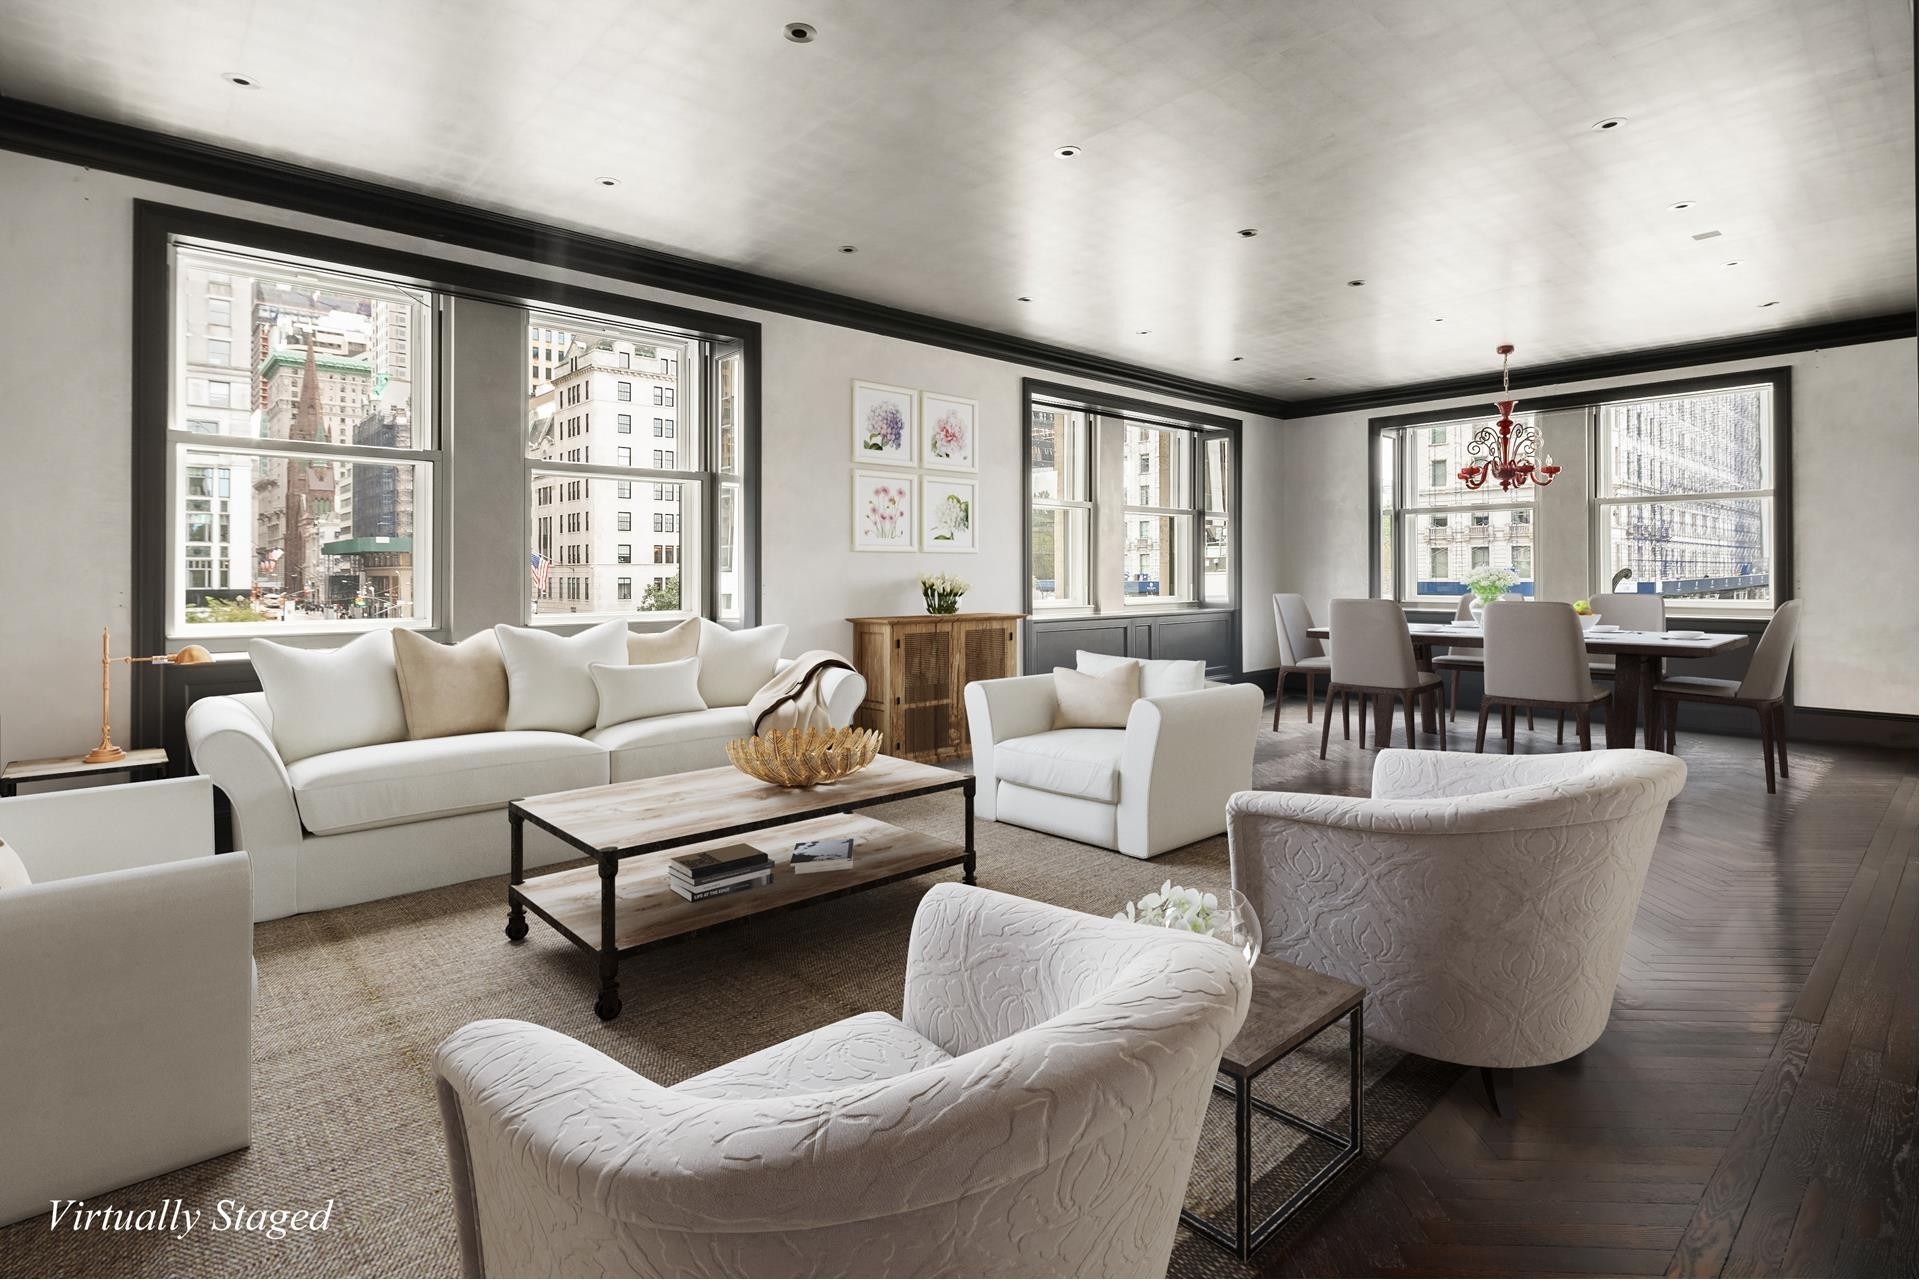 Co-op Properties for Sale at Sherry Netherland, 781 FIFTH AVE, 204/206 Lenox Hill, New York, New York 10022